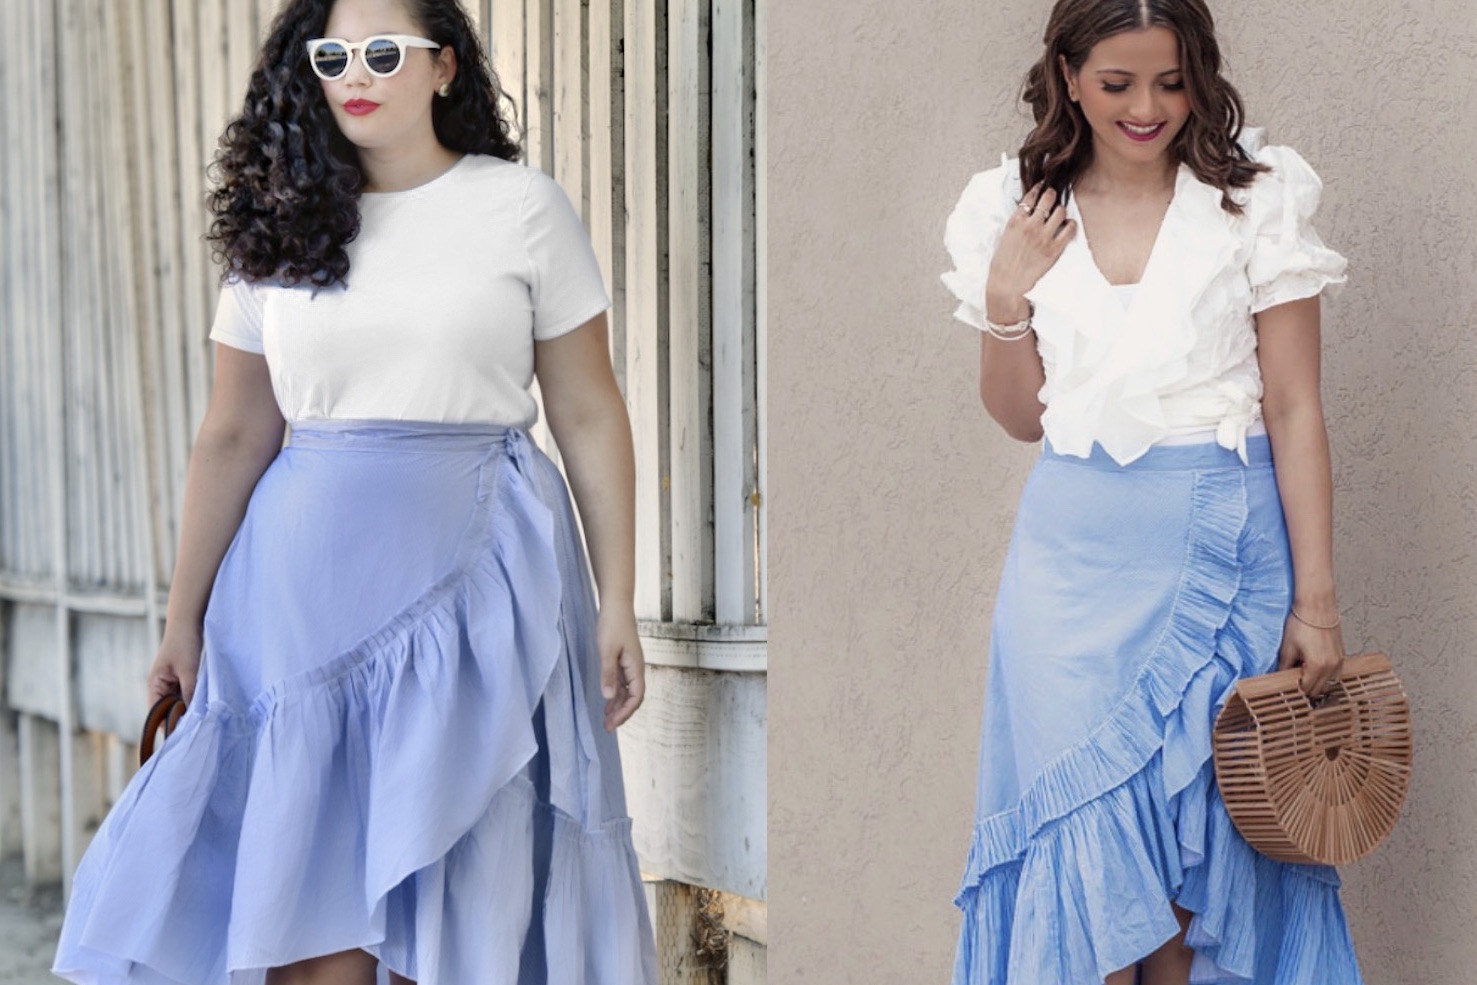 Style Has No Size: Ruffle Wrap Skirt | Girl With Curves